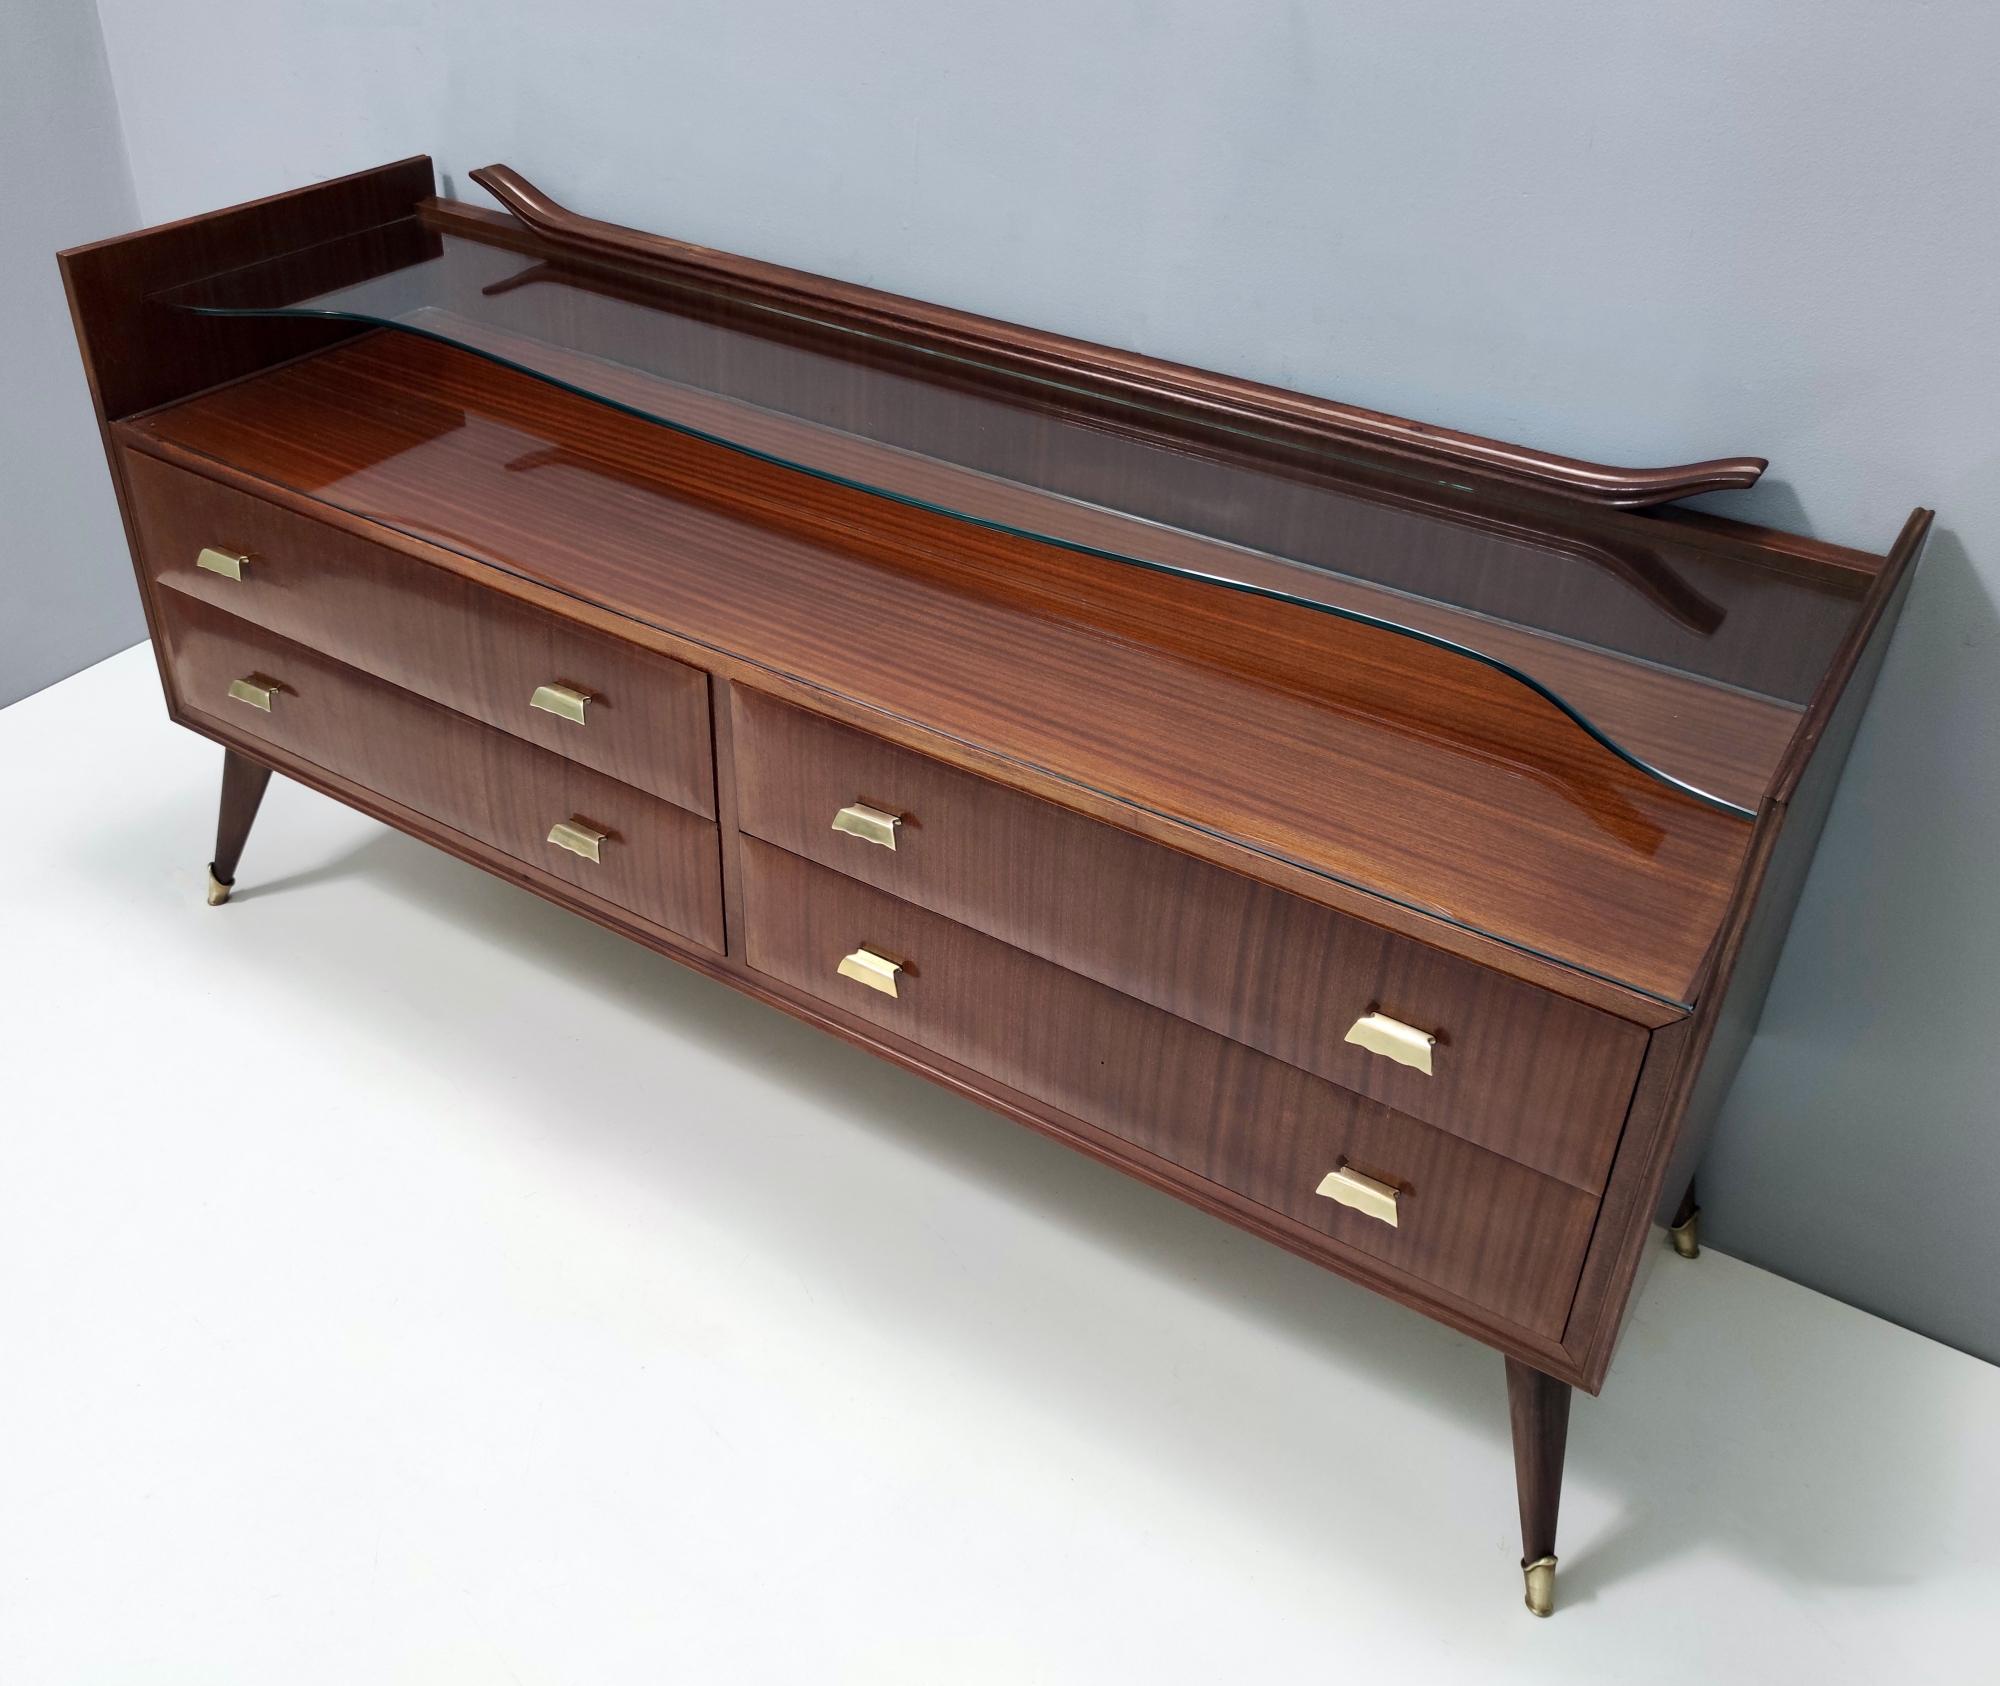 Vintage High-Quality Walnut Chest of Drawers with a Thick Glass Top, Italy In Excellent Condition For Sale In Bresso, Lombardy